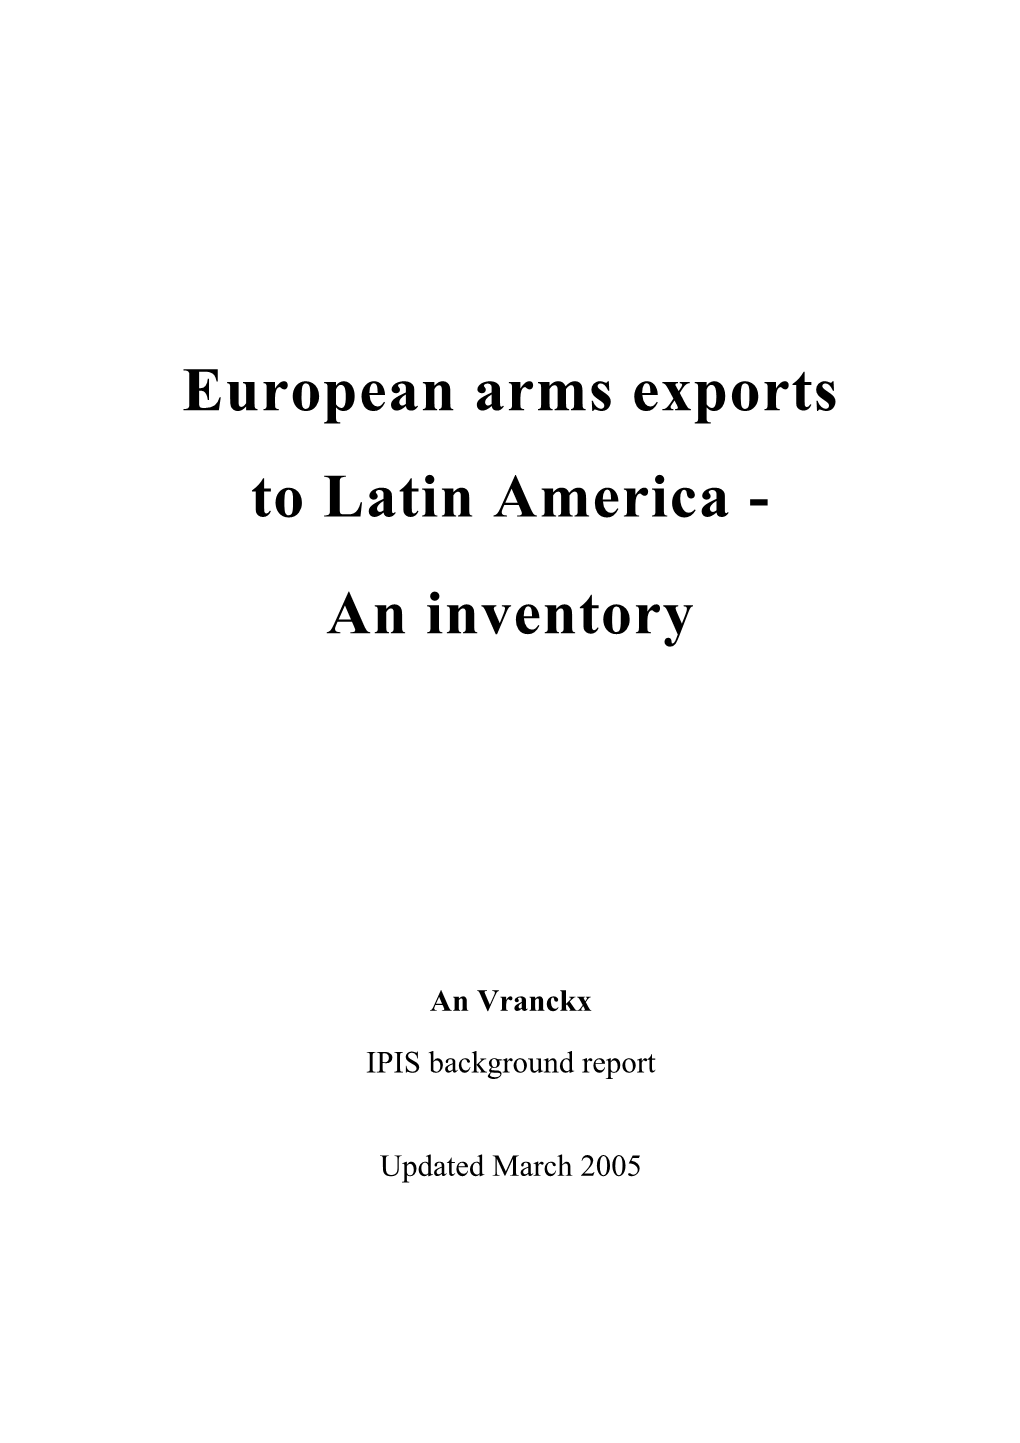 European Arms Exports to Latin America - an Inventory